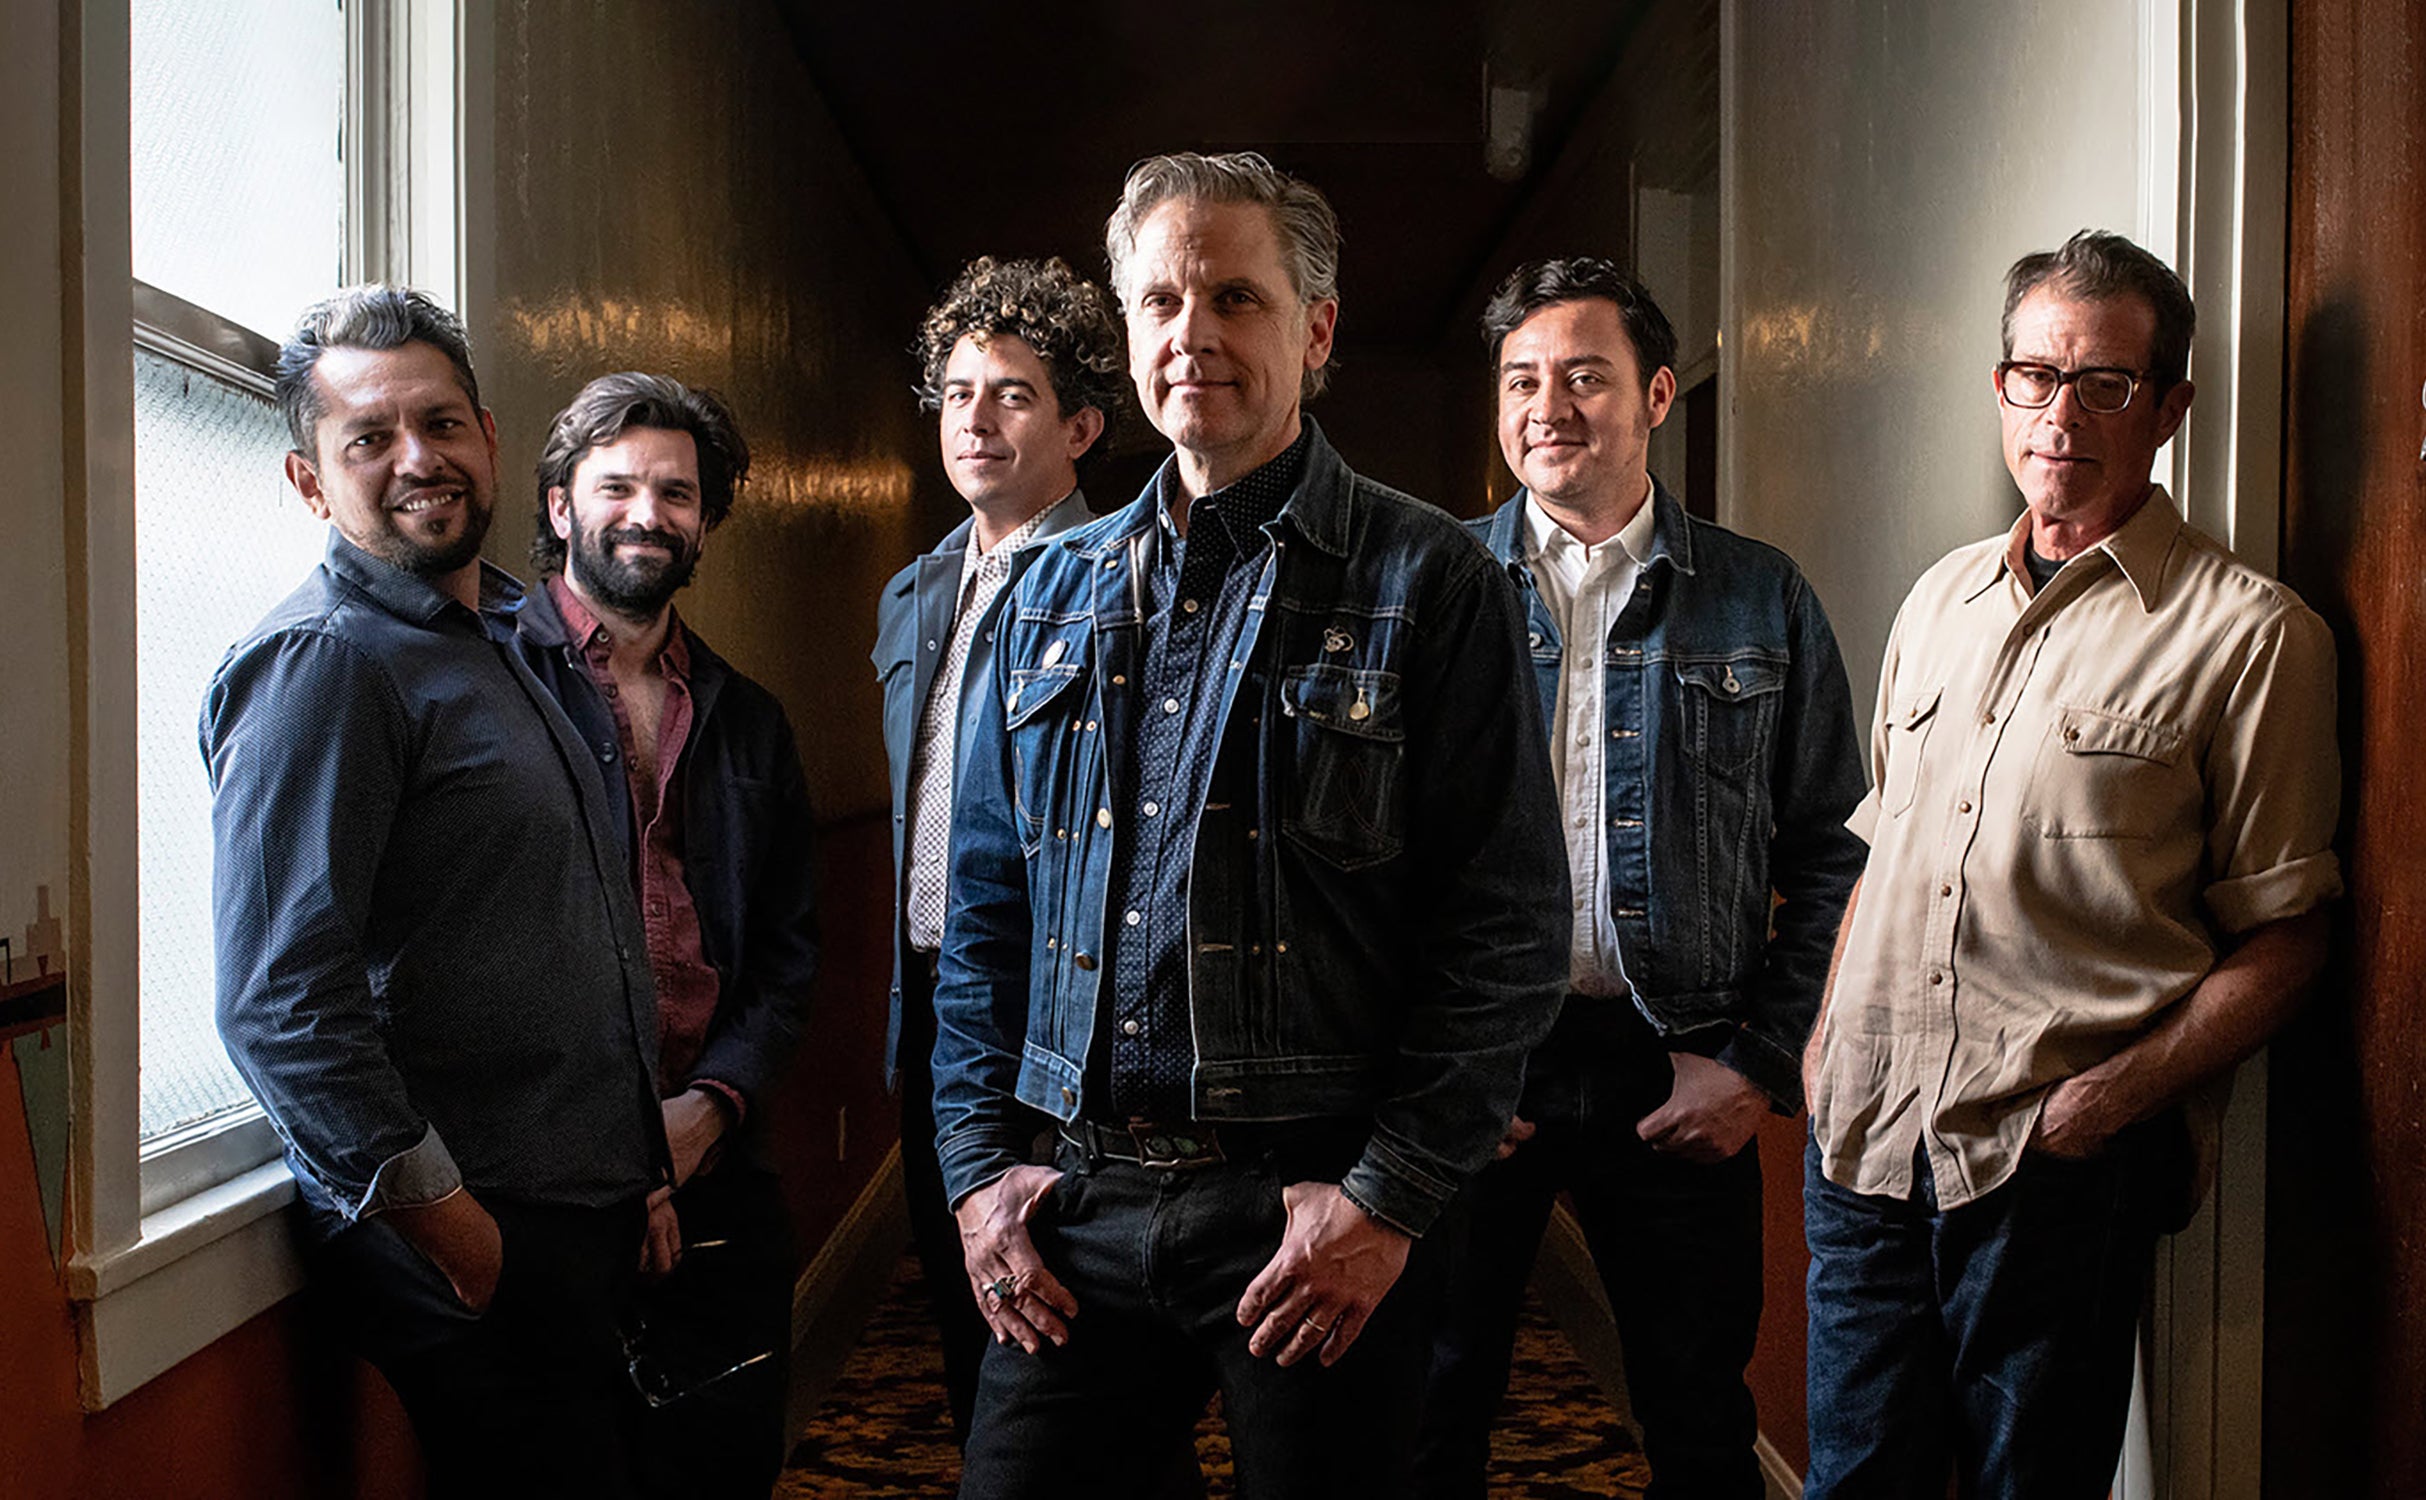 Calexico at Knitting Factory Concert House - Boise - Boise, ID 83702